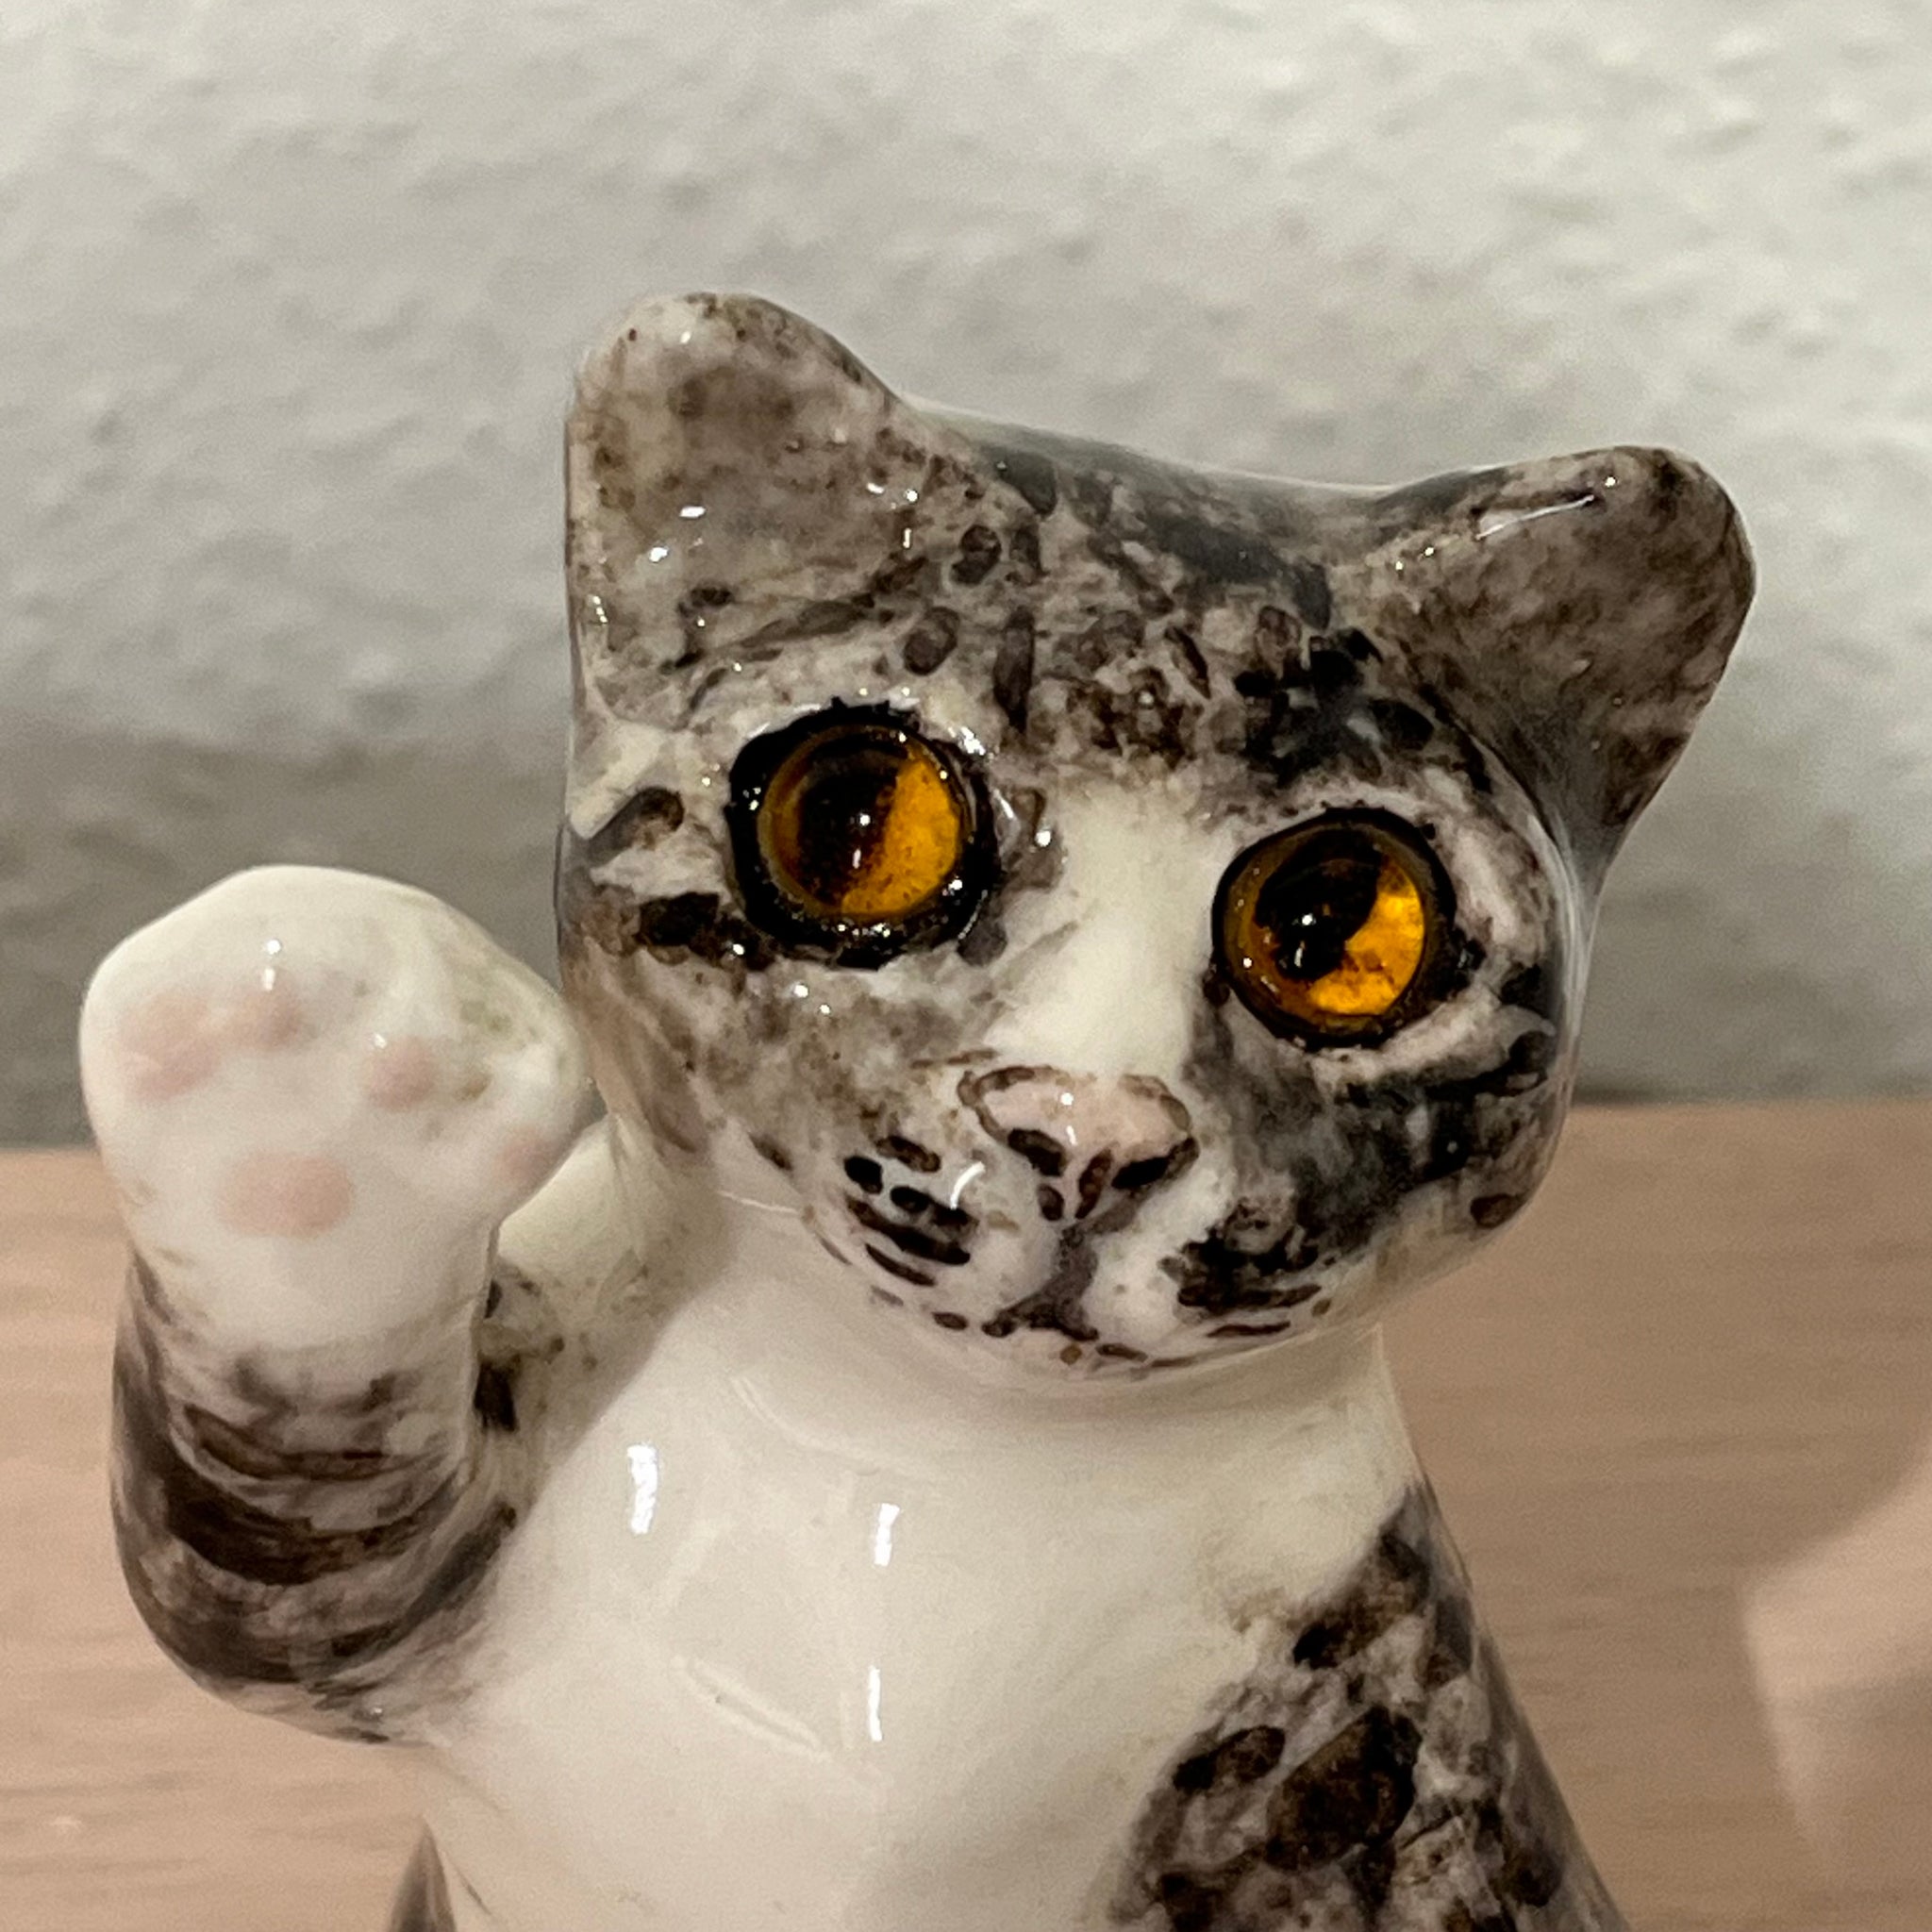 Grey and White Tabby Cat, Paw Raised - Size 2